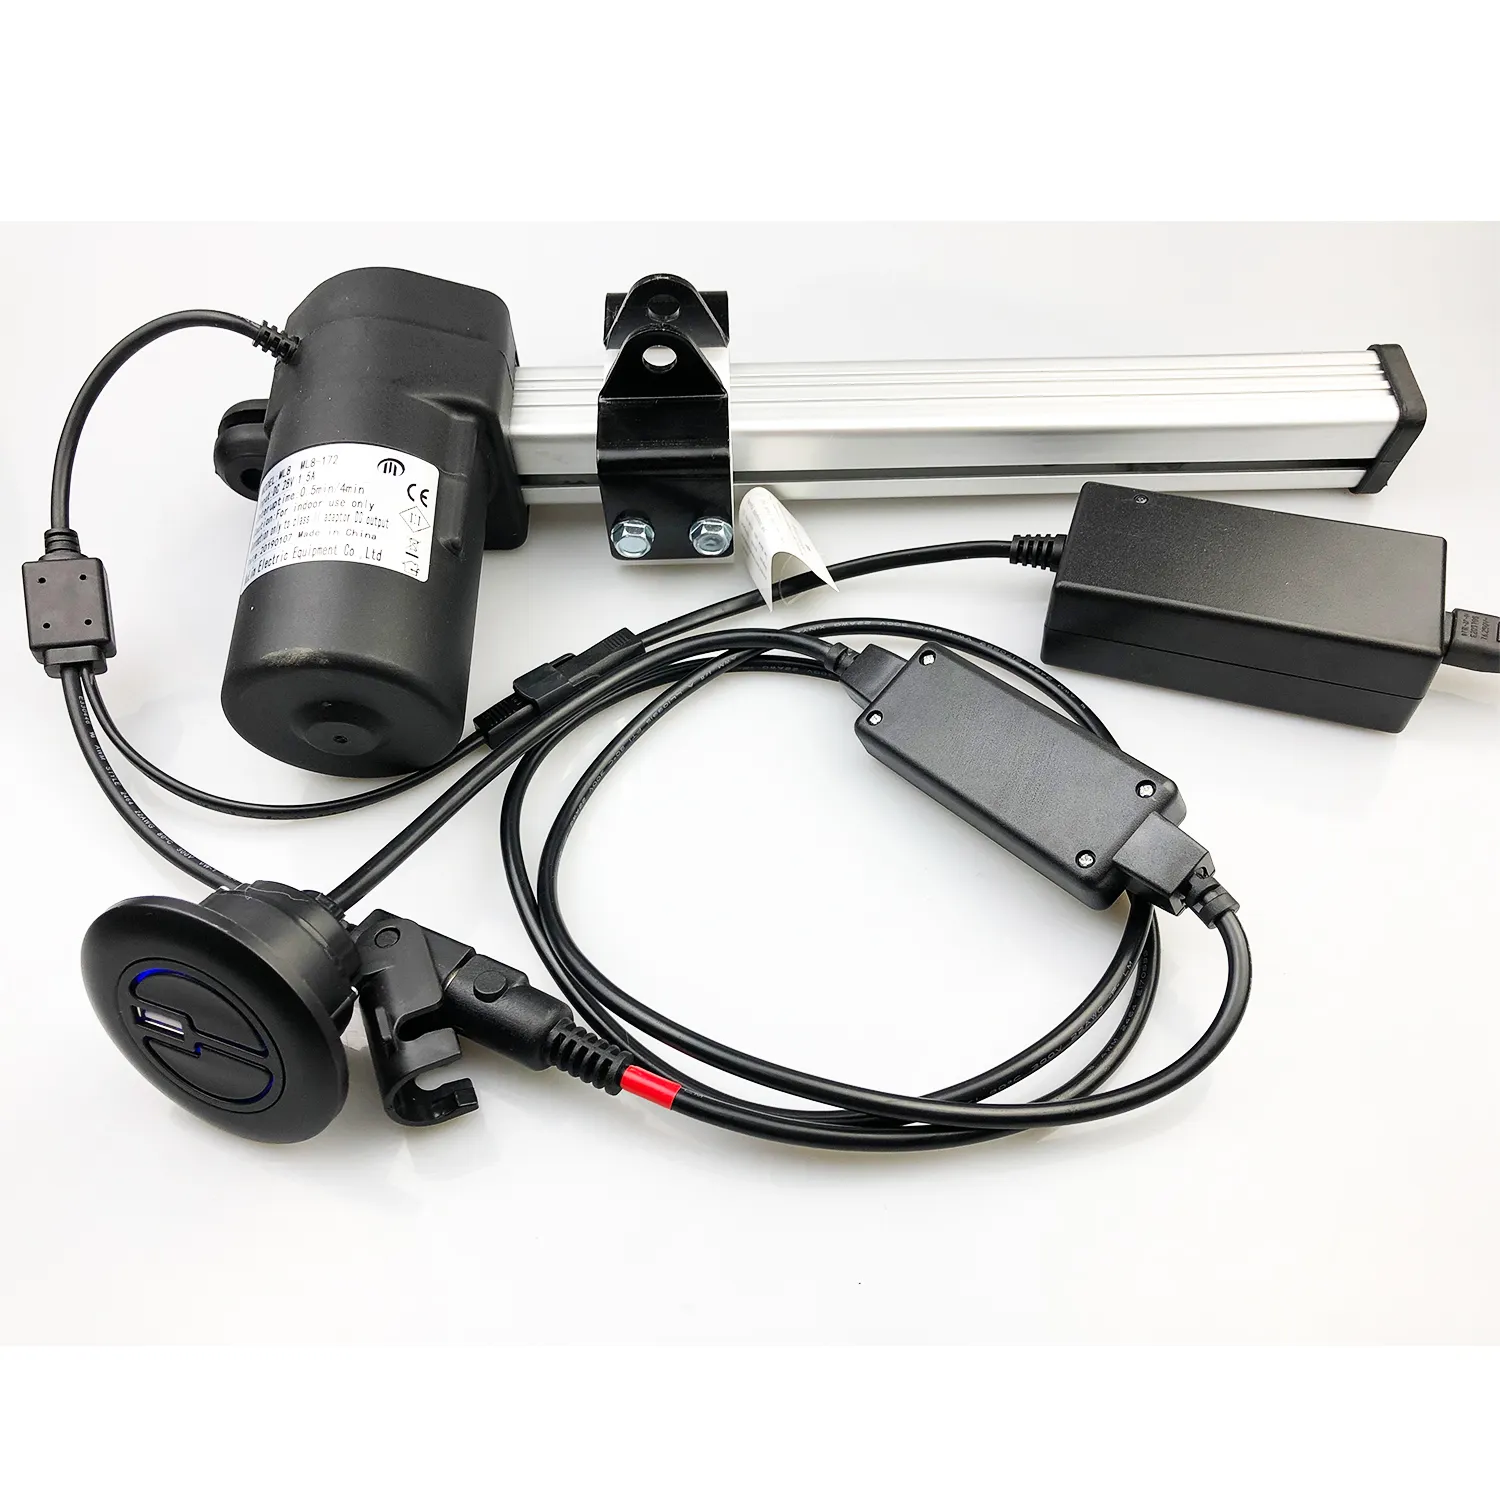 Cheap price 24V linear actuator DC motor for hopital bed recliner chair TV lift lifting table